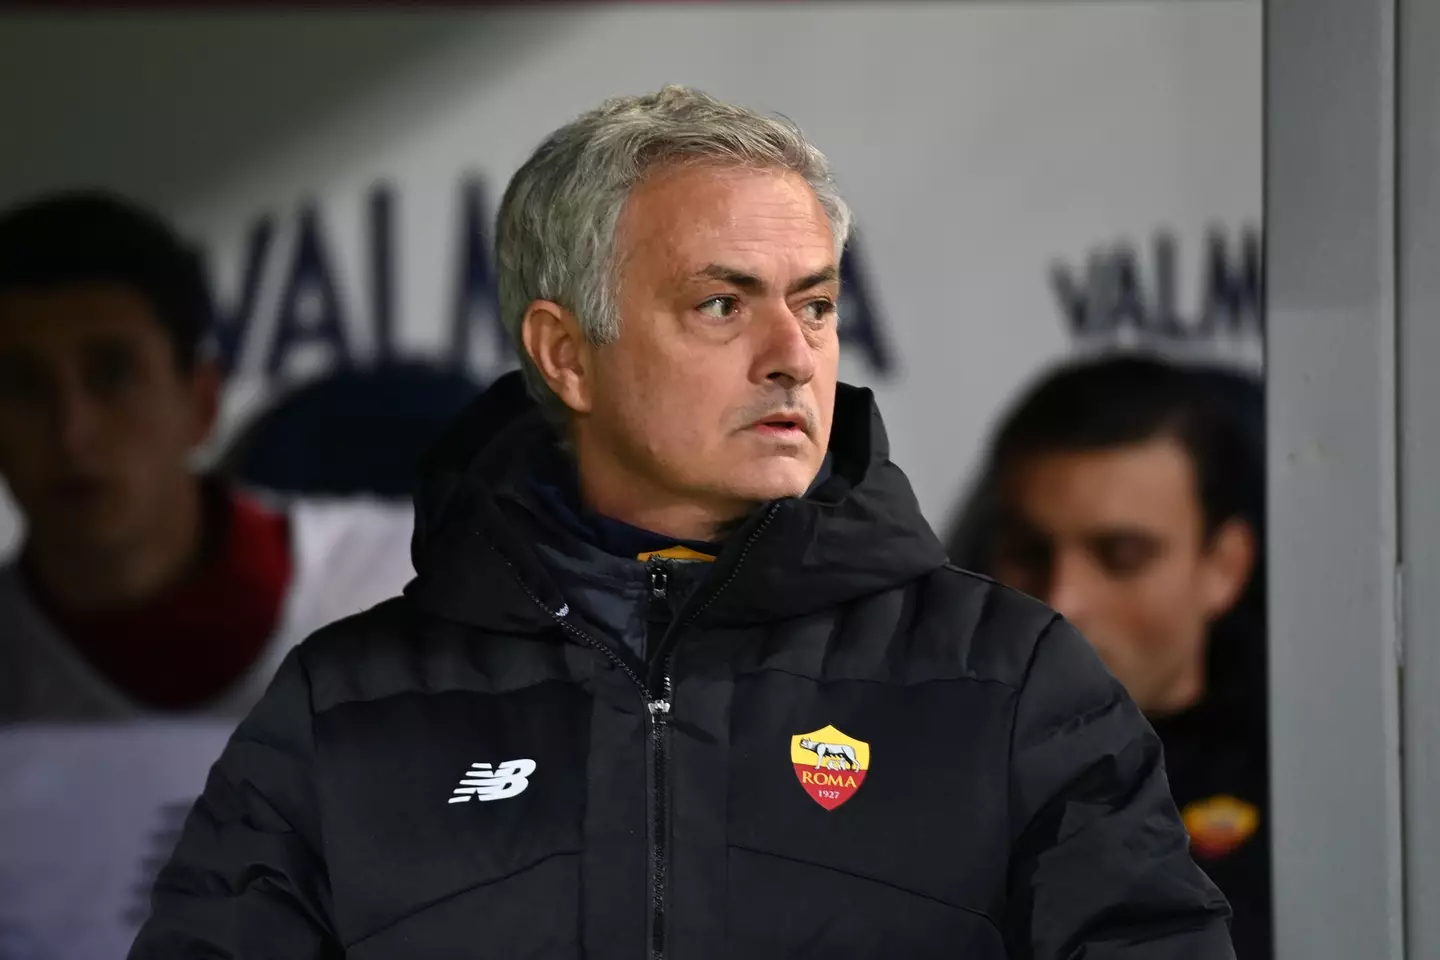 Mourinho has unfinished business with Roma. (Image